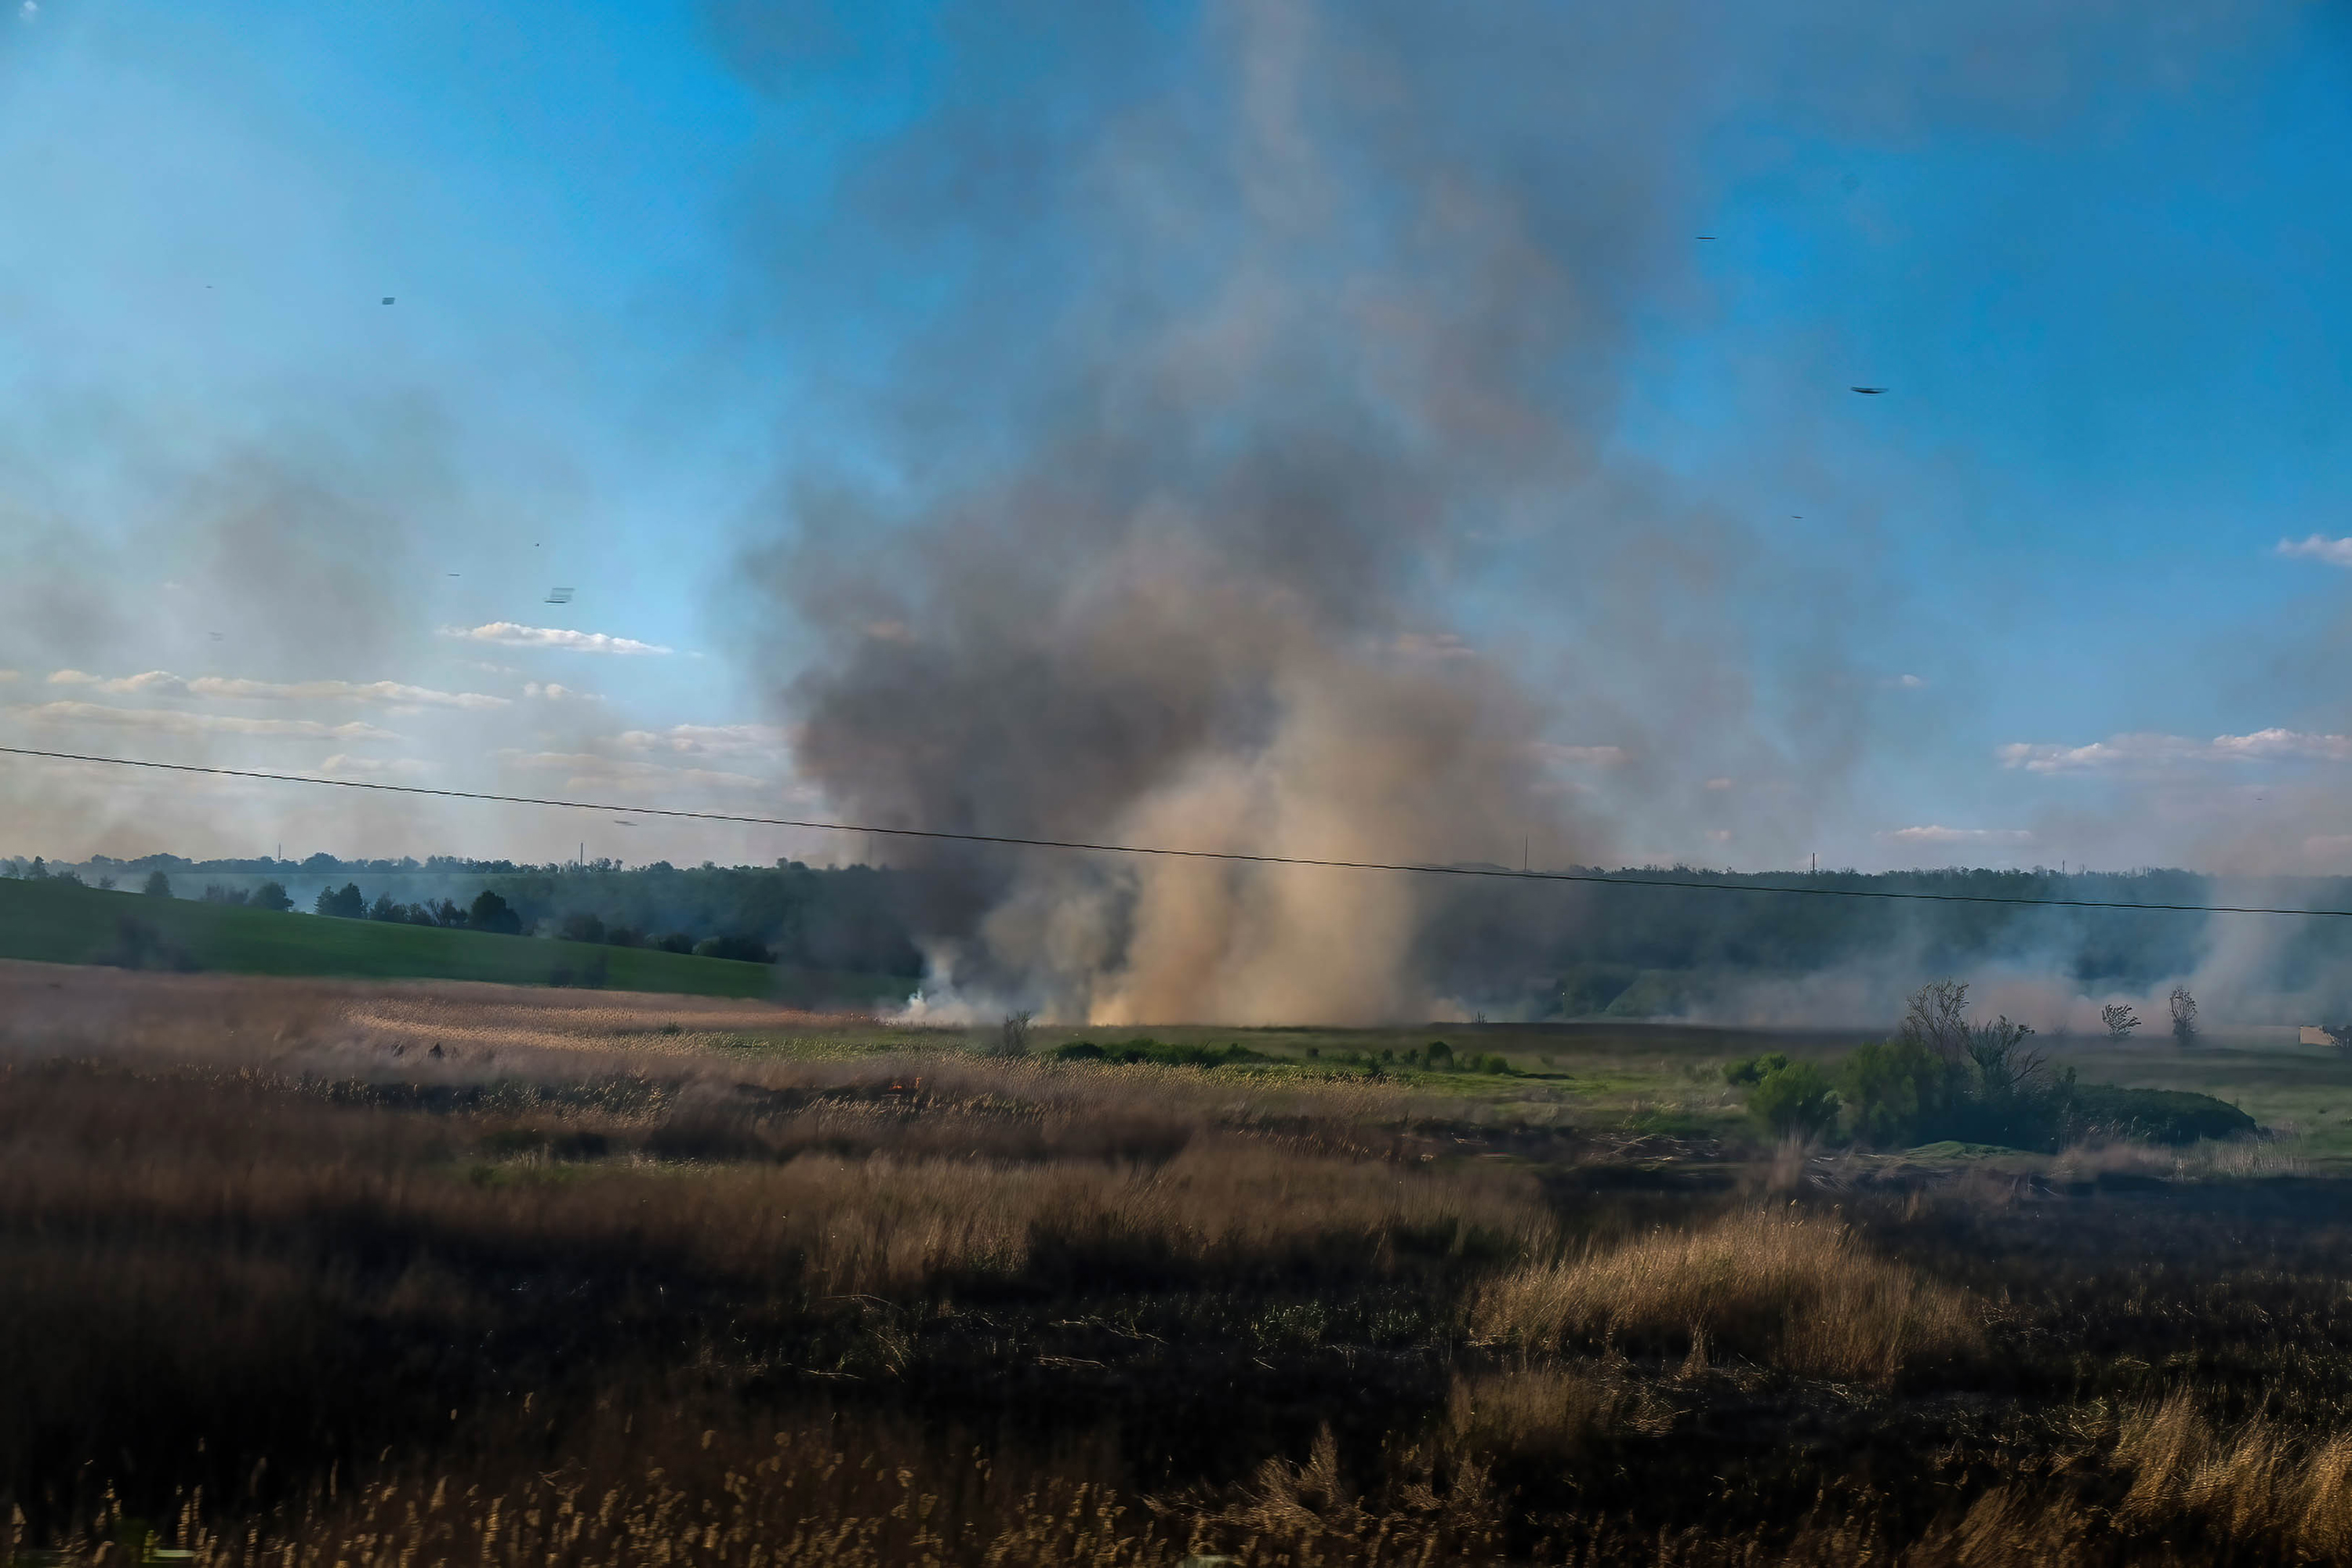 Smoke in an area that has been shelled on the main road between Severodonetsk and Kramatorsk on May 23.